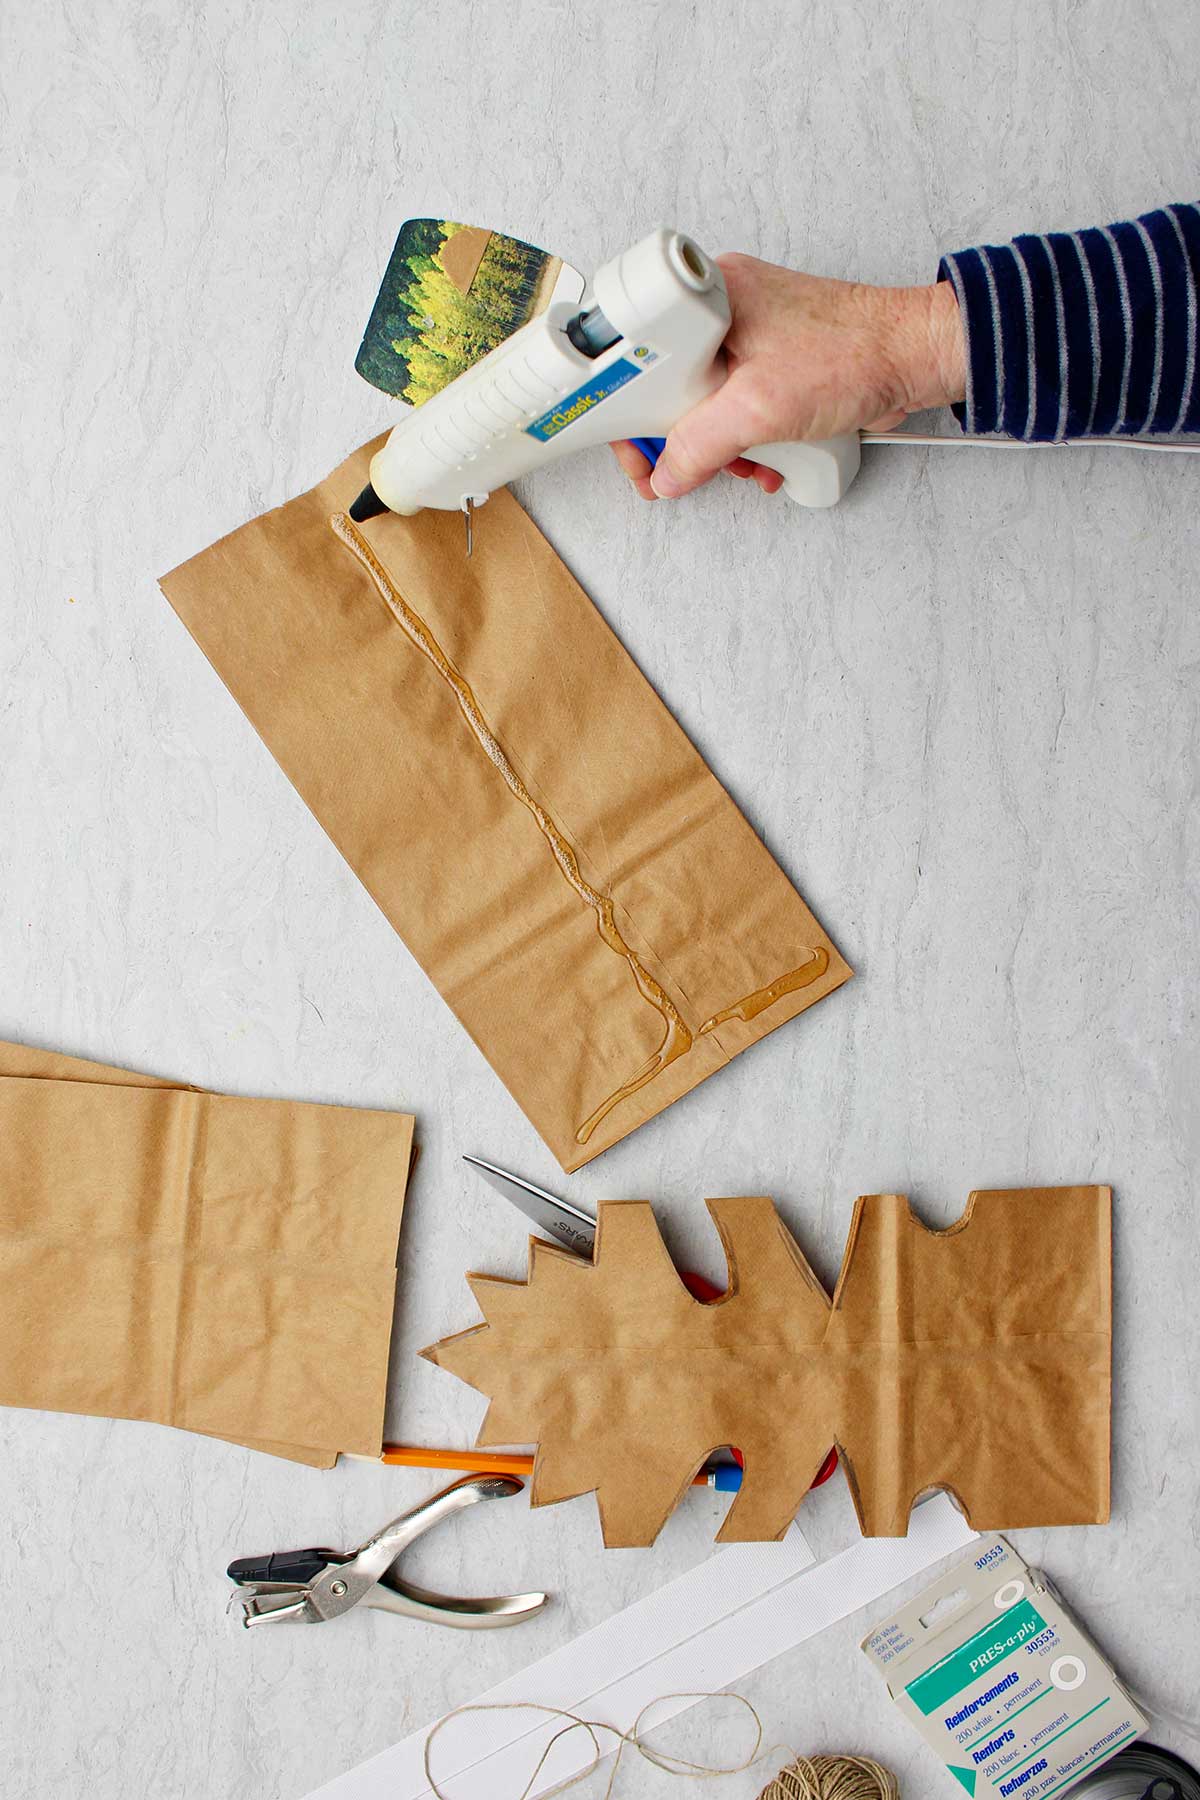 Hand hot gluing brown paper bags together before cutting.